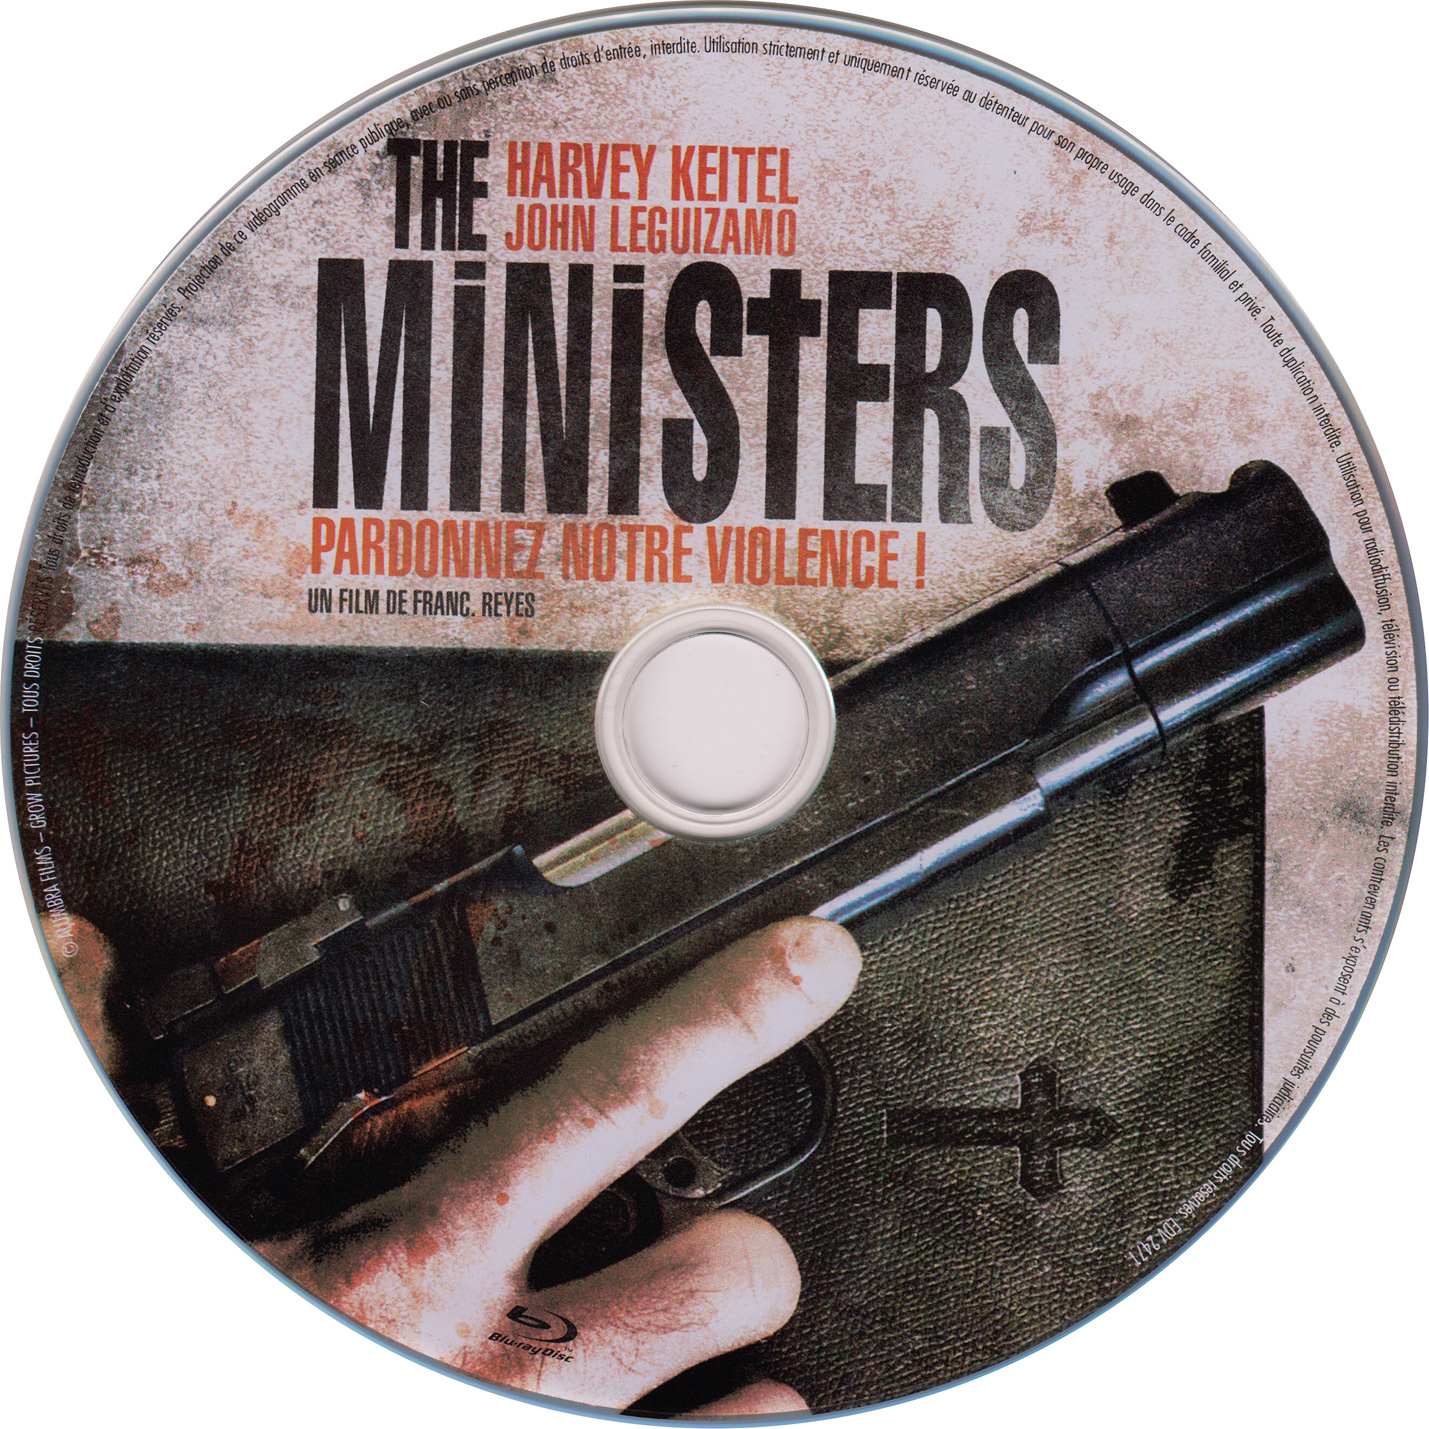 The ministers (BLU-RAY)